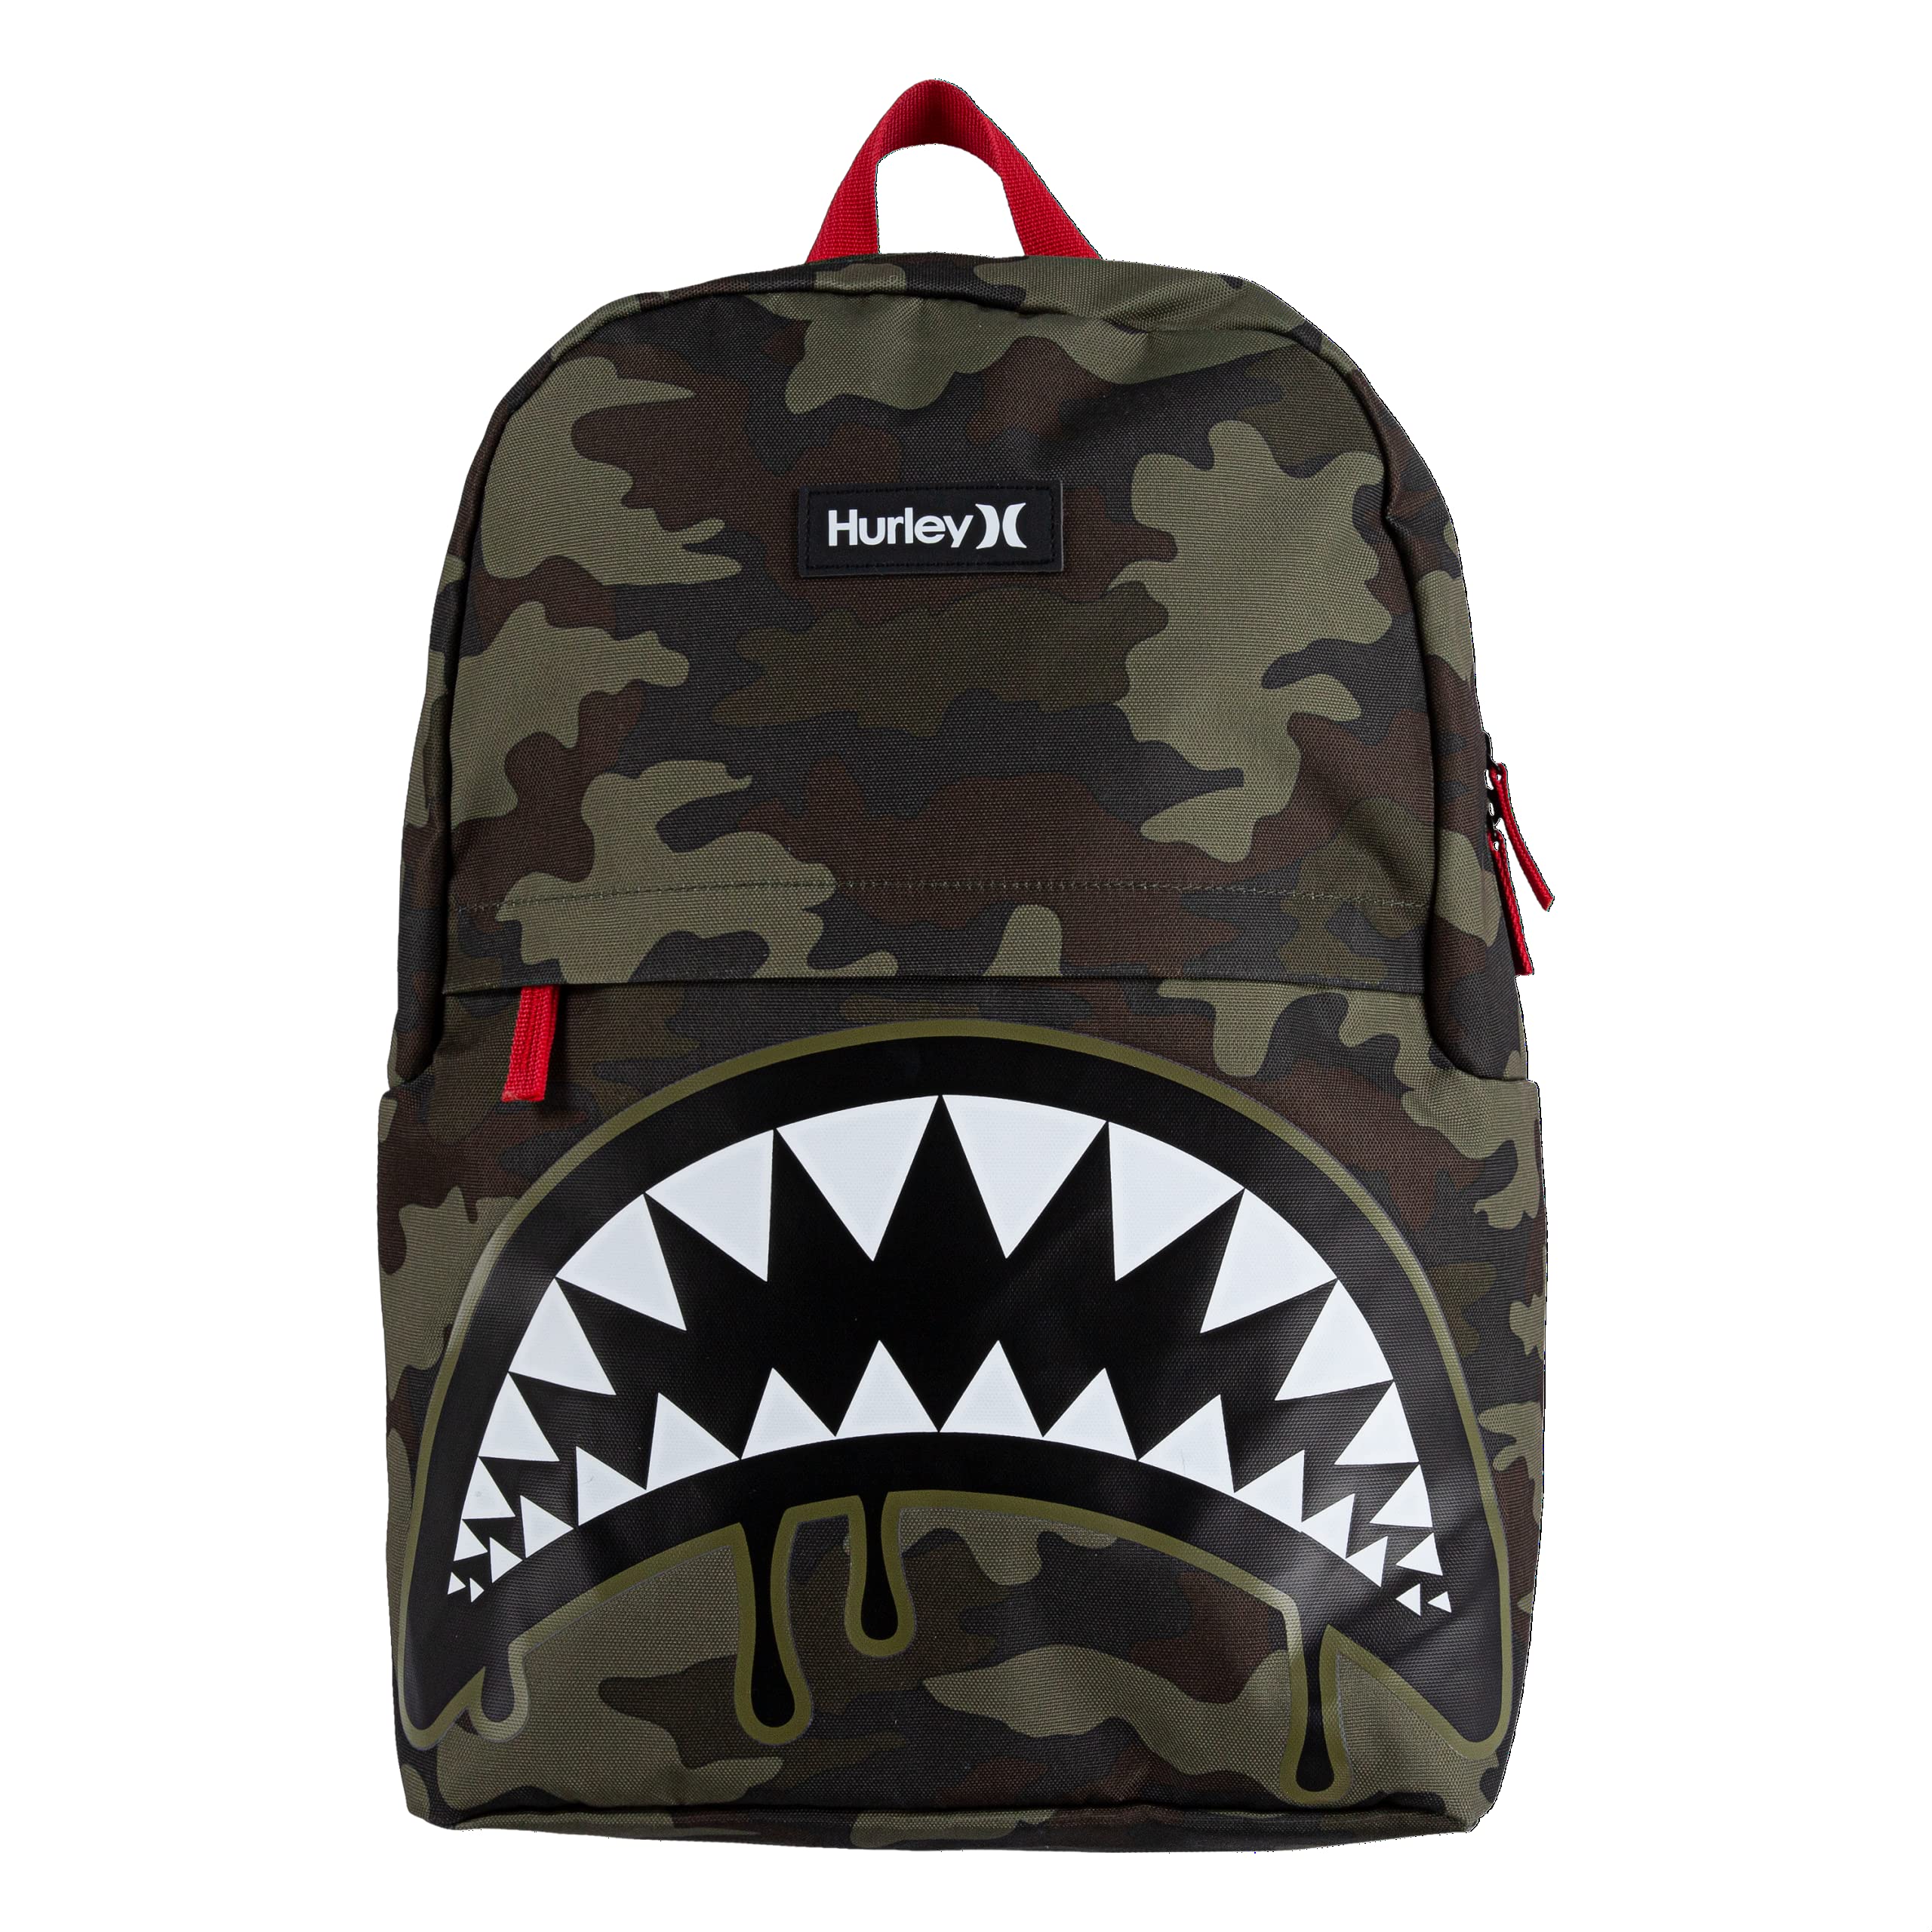 Hurley Unisex-Adults One and Only Backpack, Green Camo Shark, Large